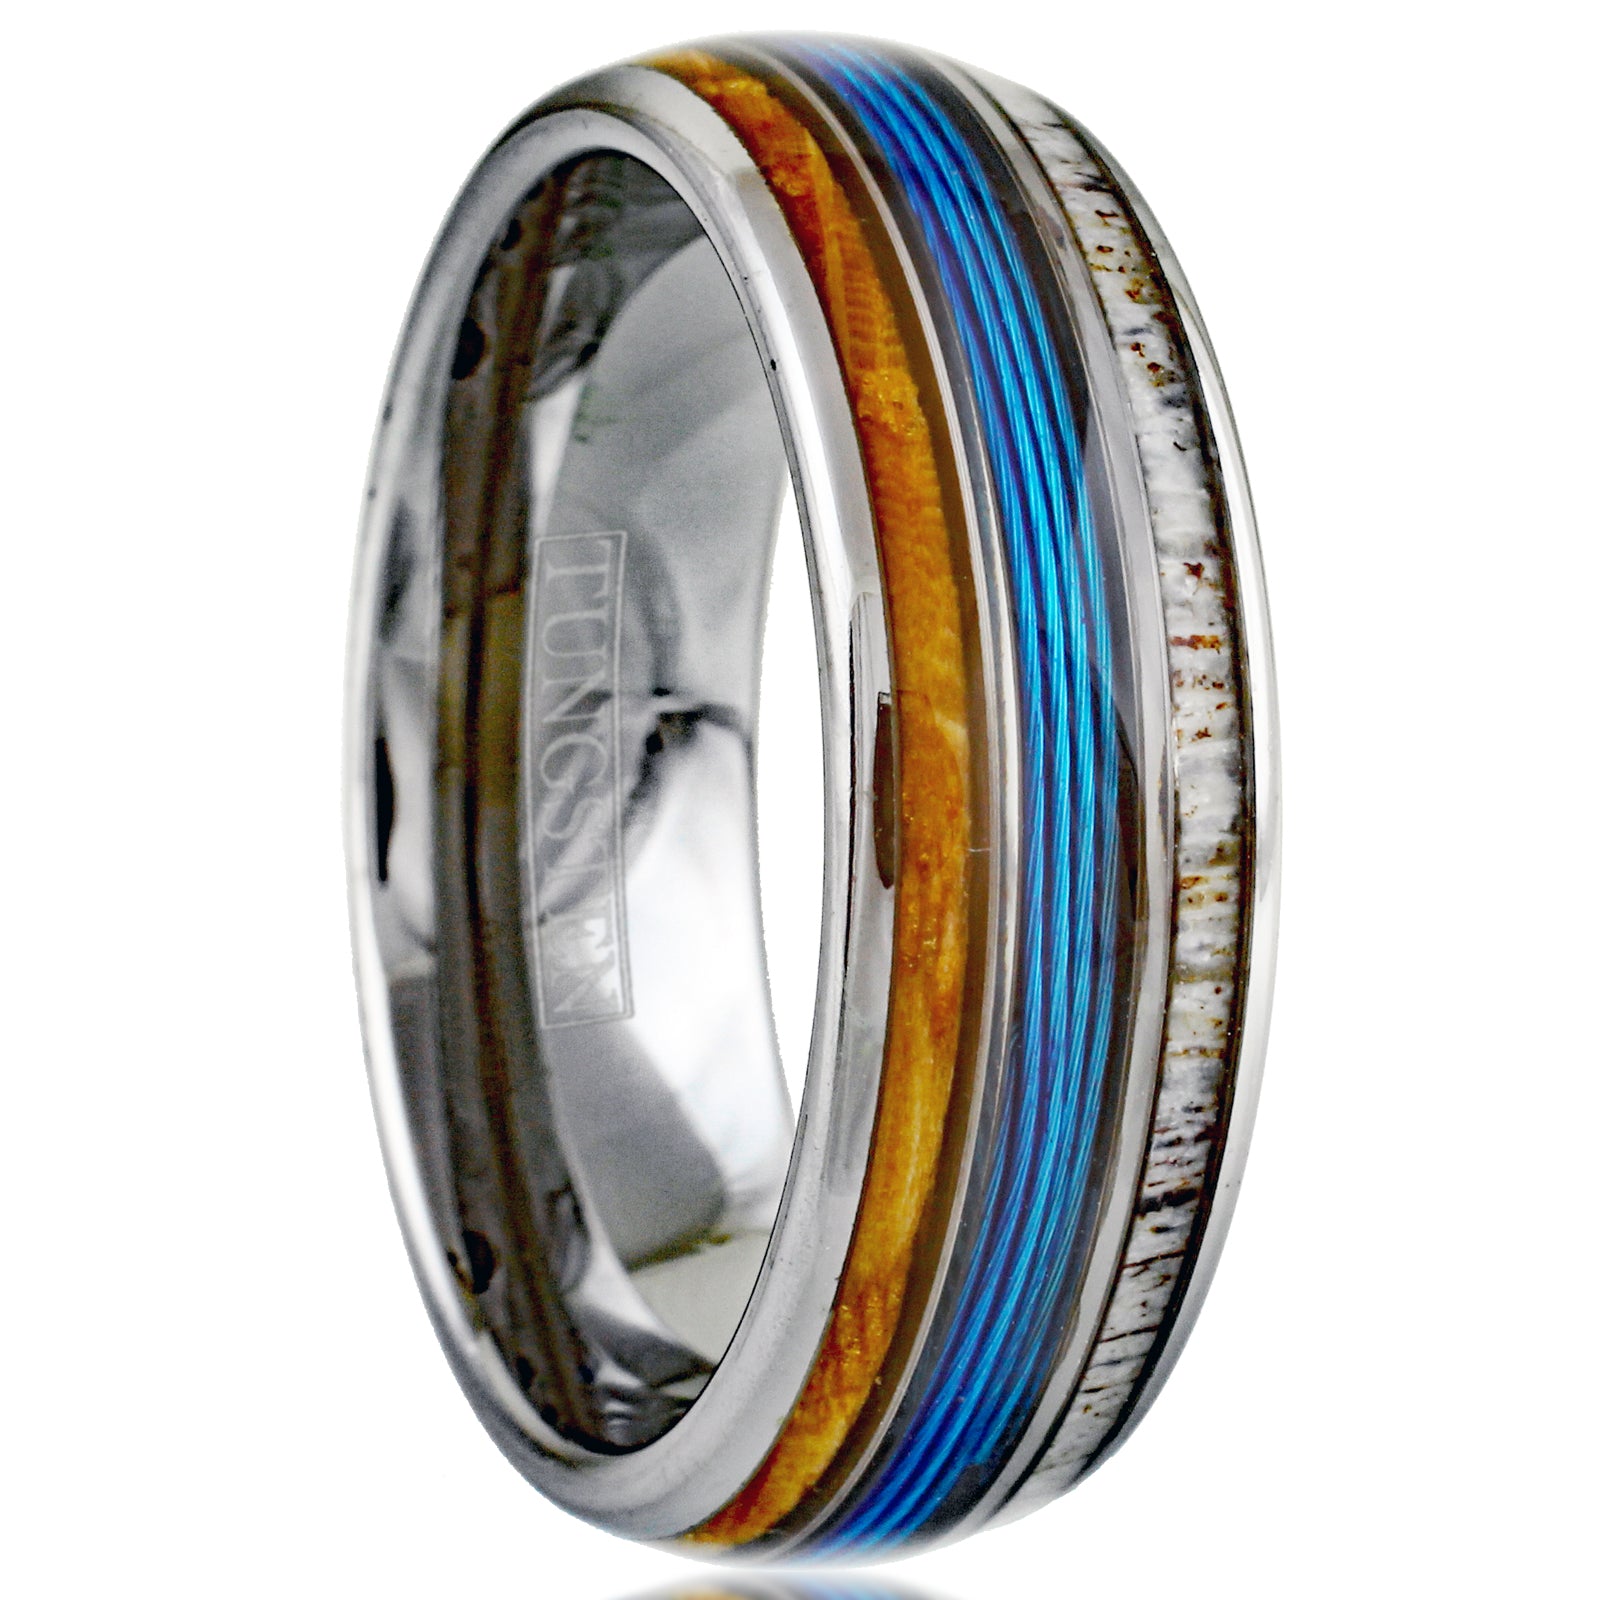 Magnificent Polished Black Tungsten Low Dome Ring with Bright Blue Real  Fishing Line Between Whiskey Barrel Oak Wood and Deer Antler Inlays.